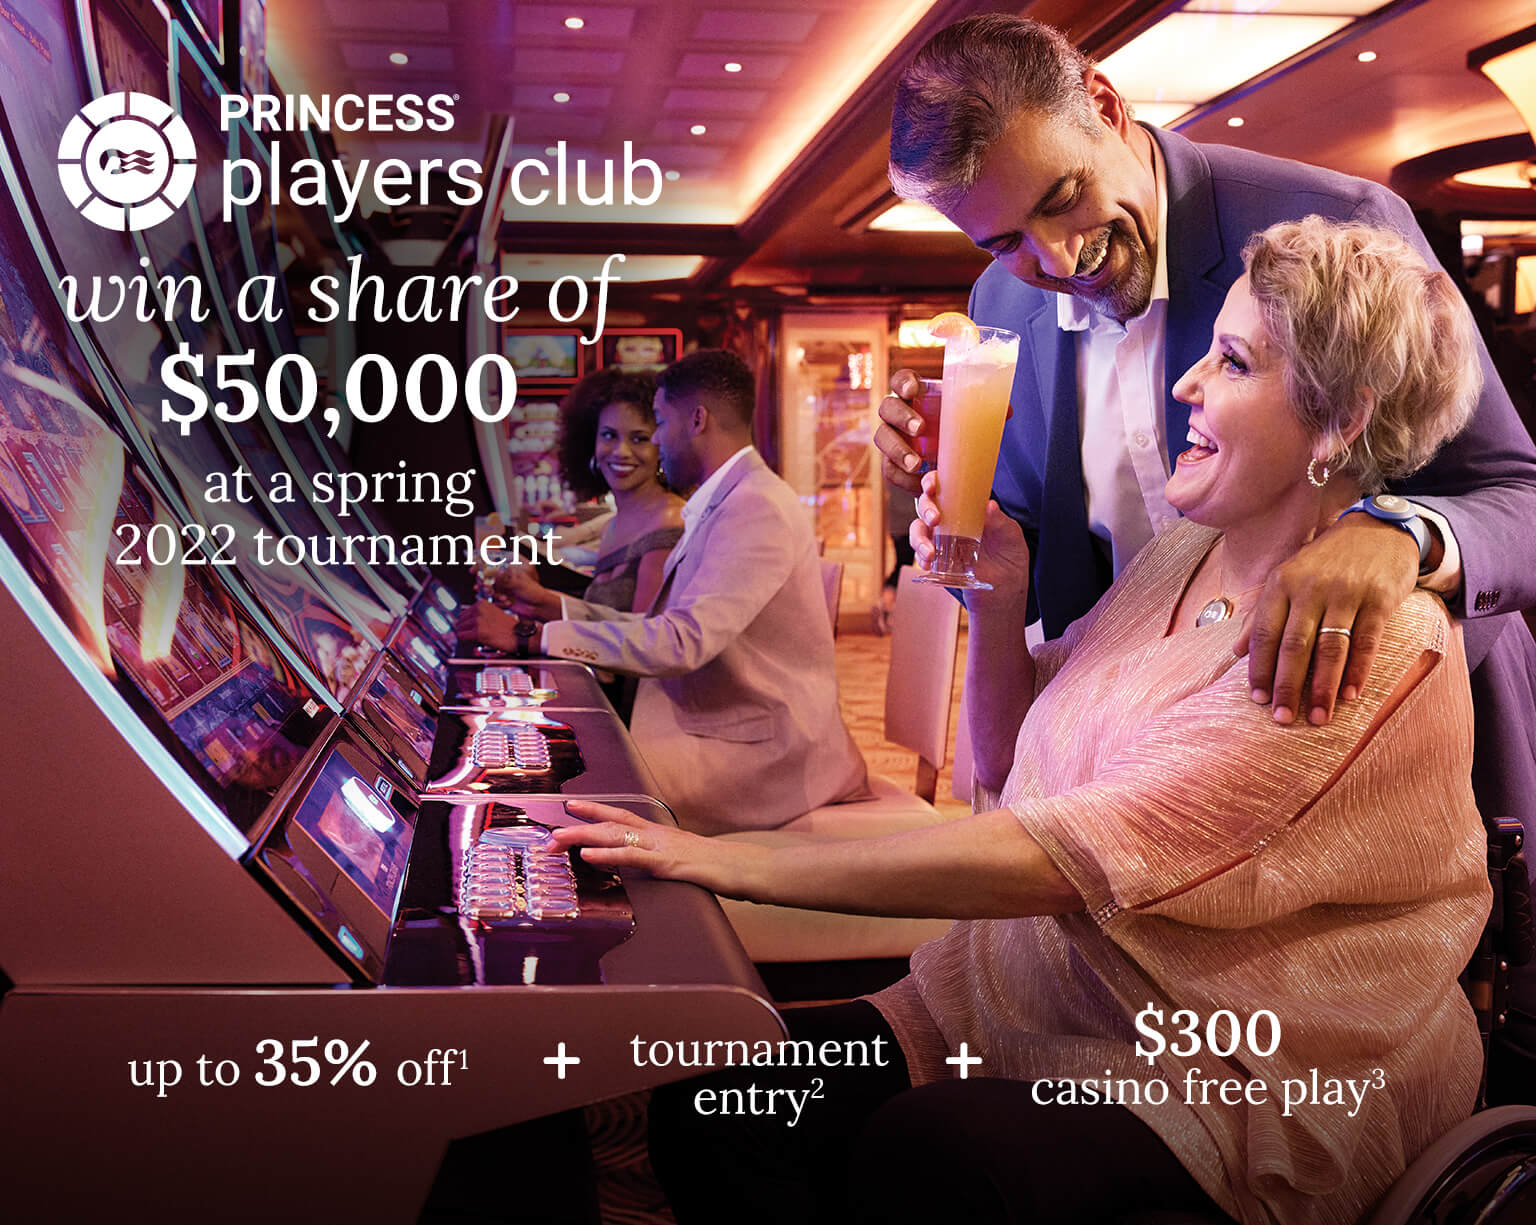 A man and woman play at a slot machine. Click here to book.